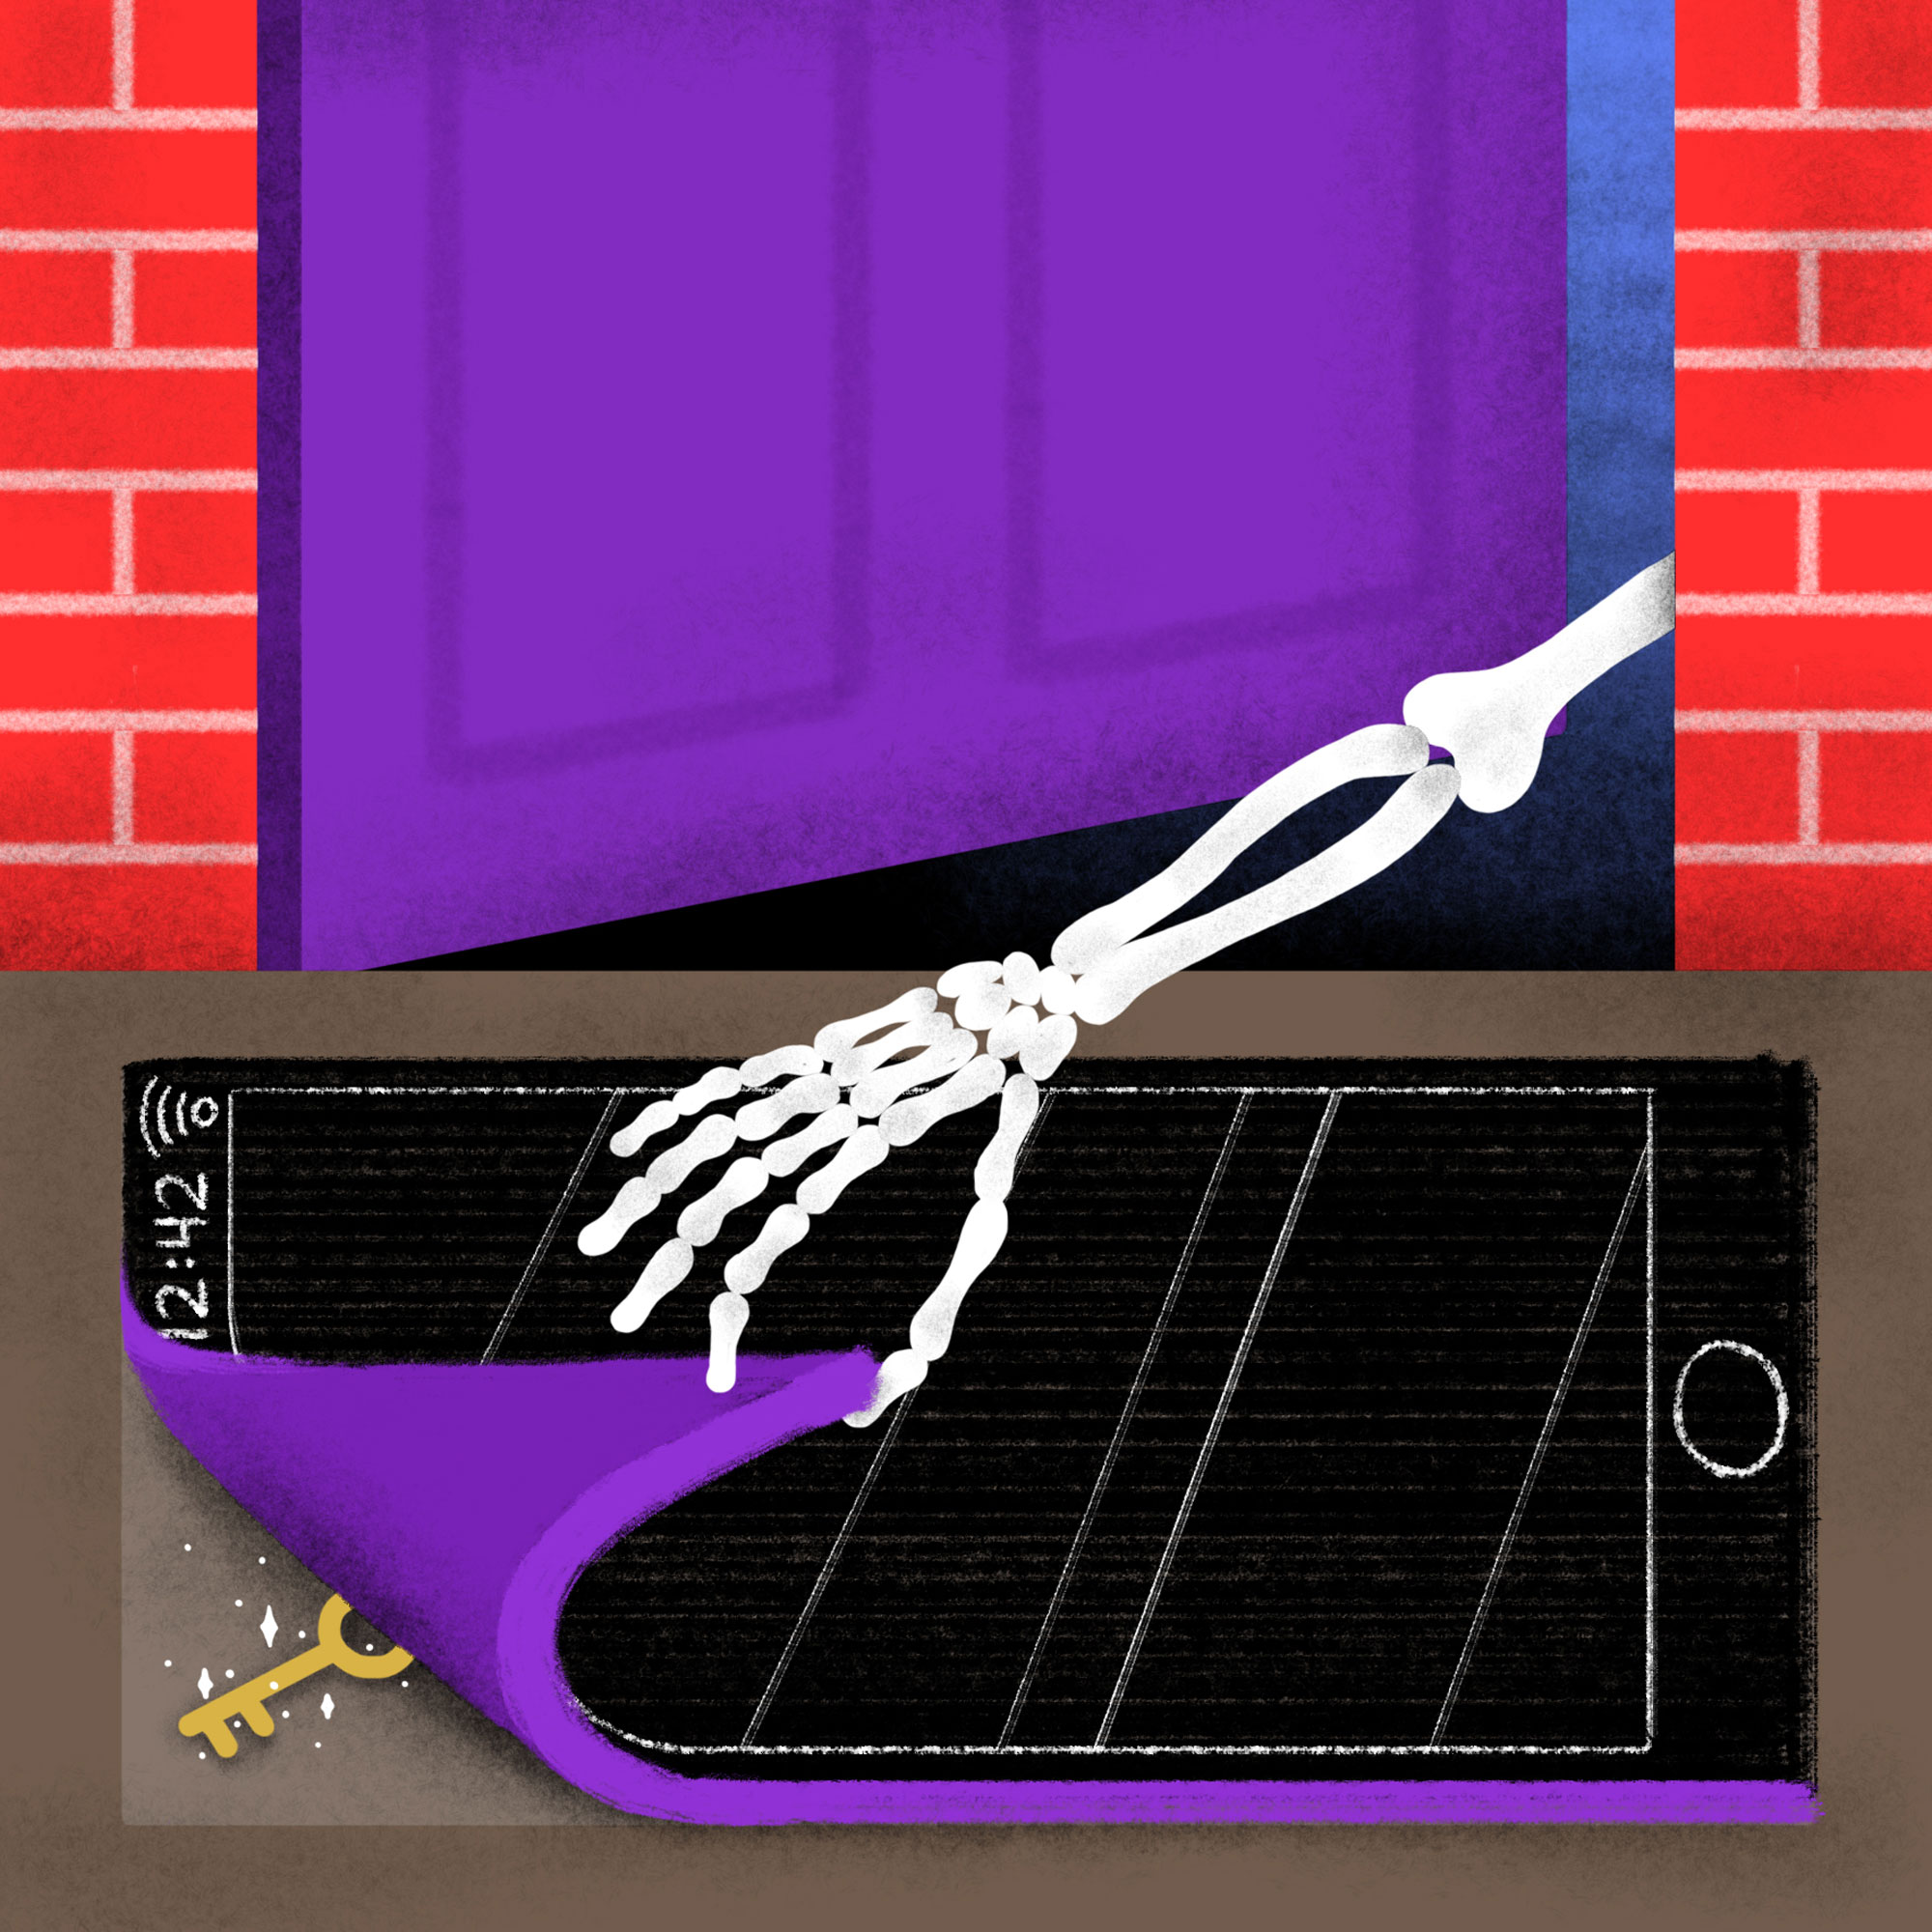 Illustration of skeleton arm lifting corner of doormat shaped like an iphone, revealing a key